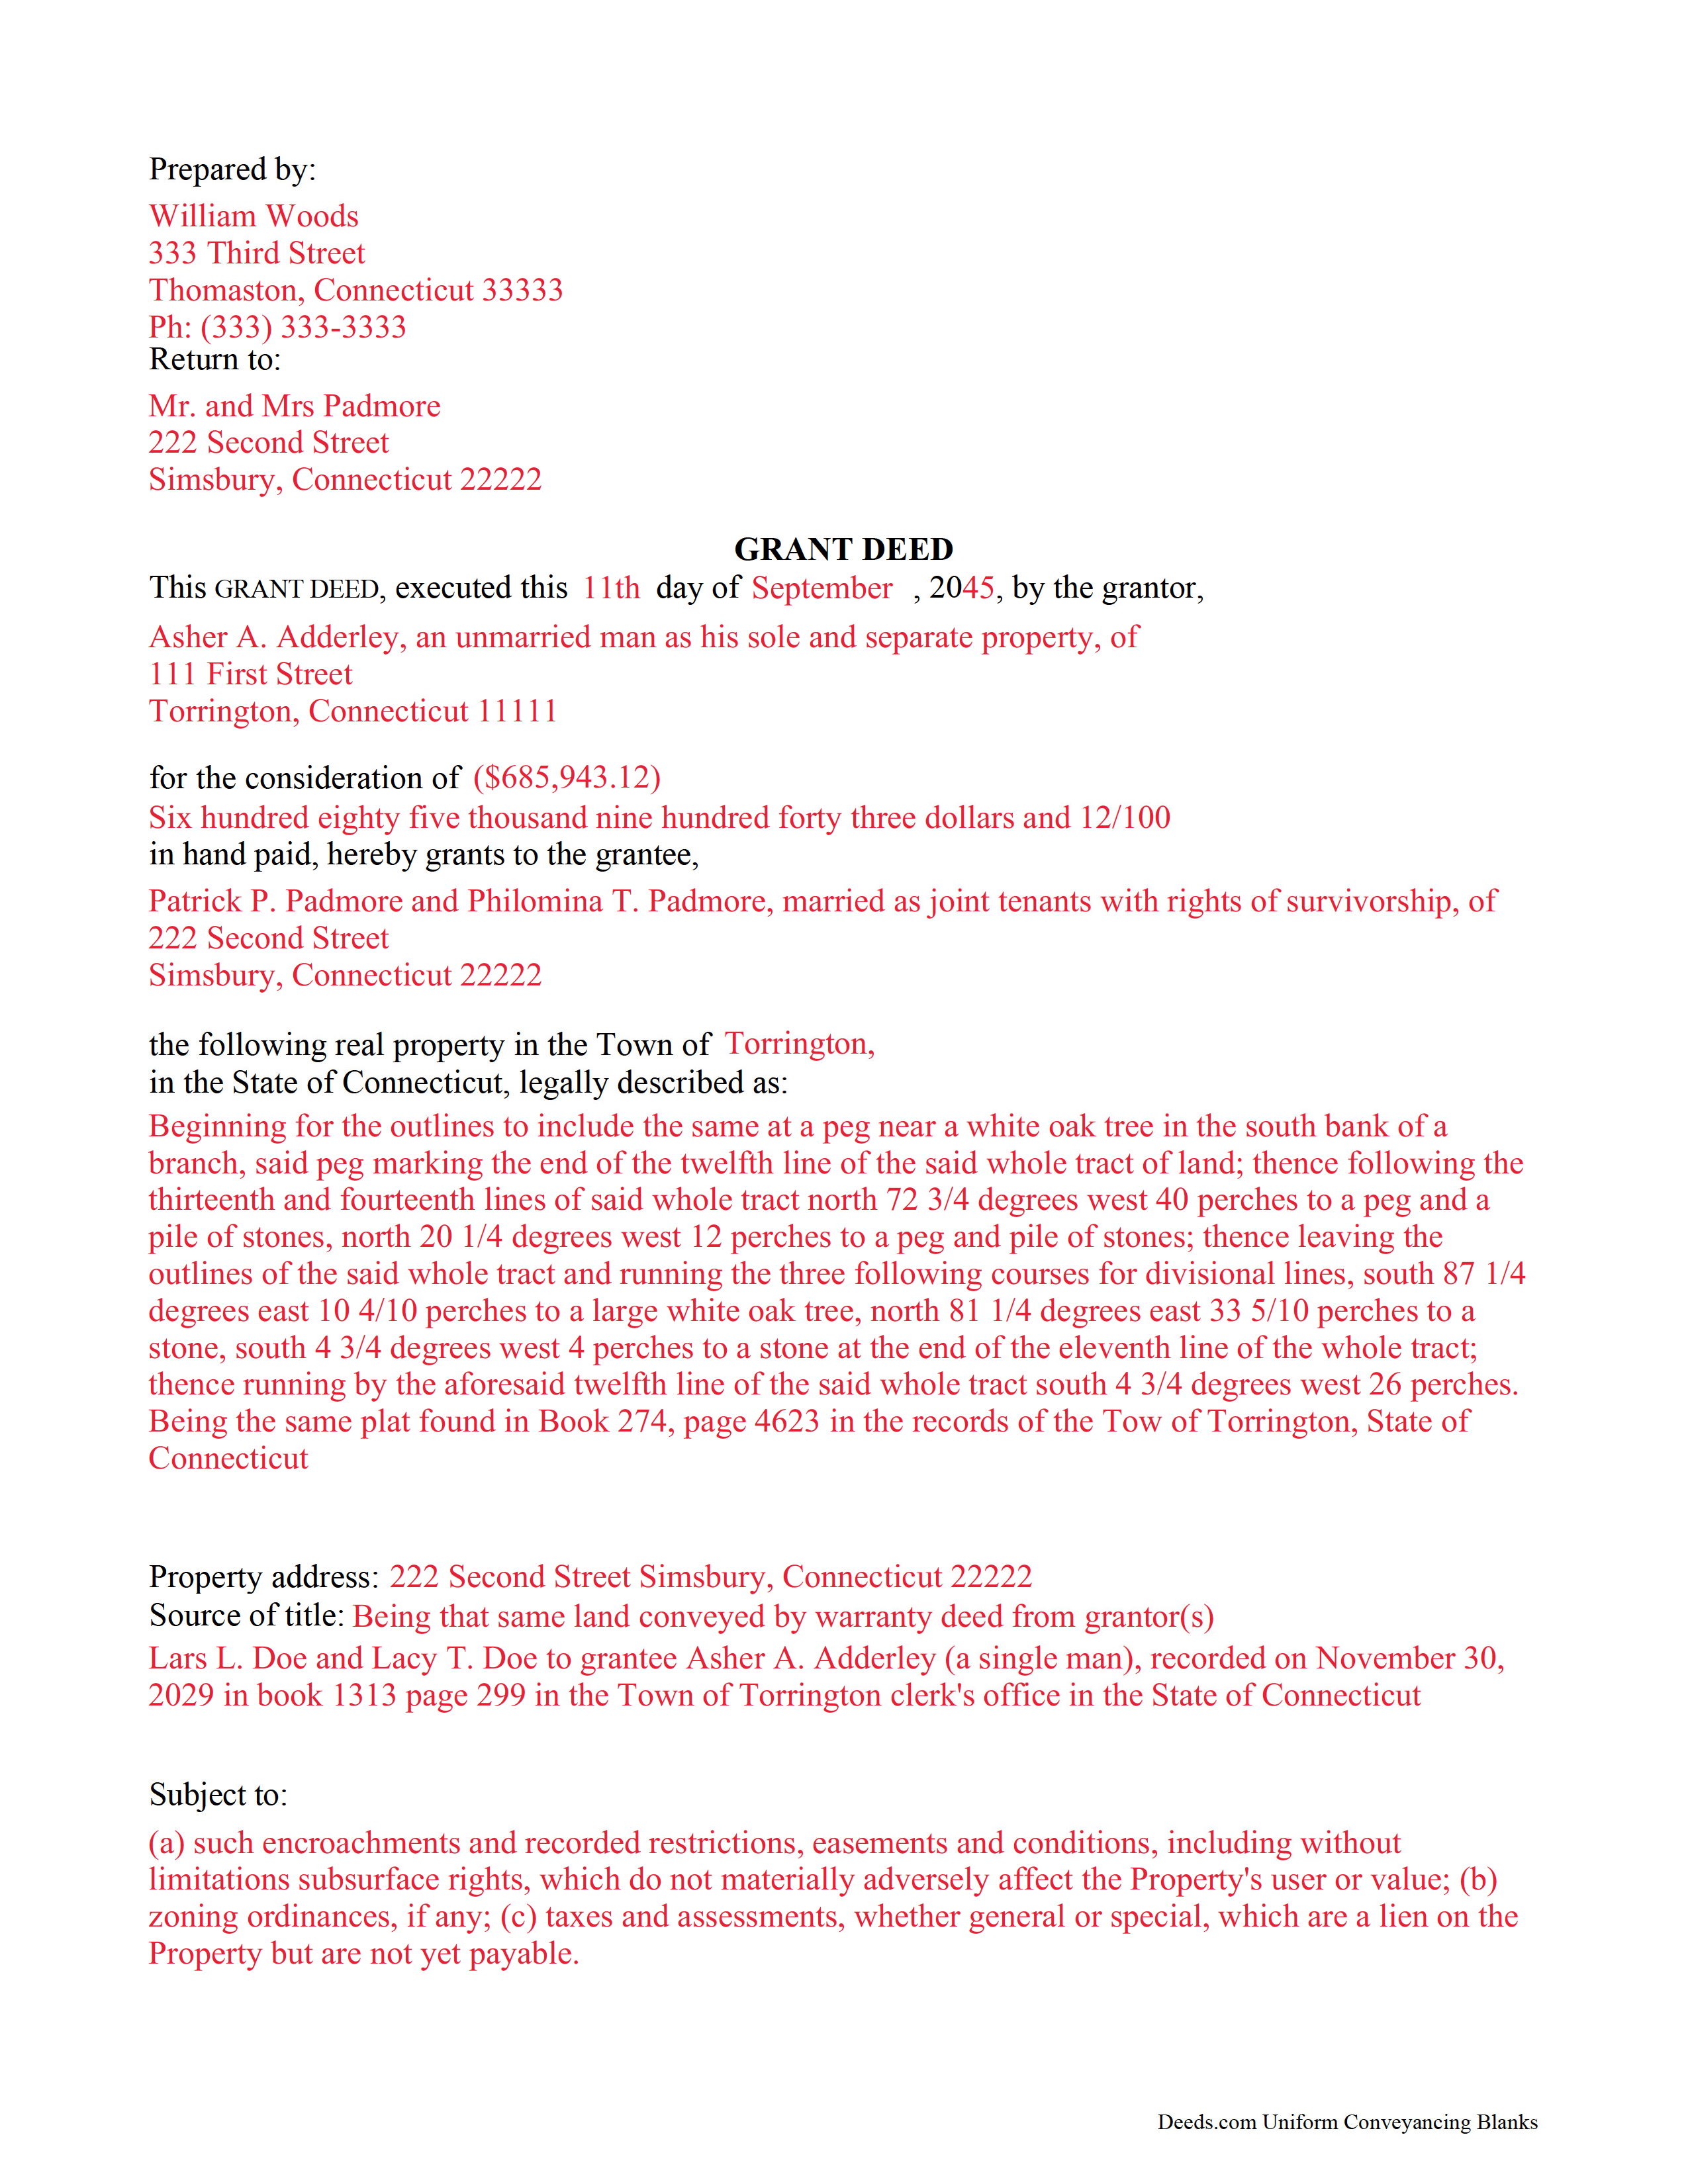 Completed Example of the Grant Deed Document